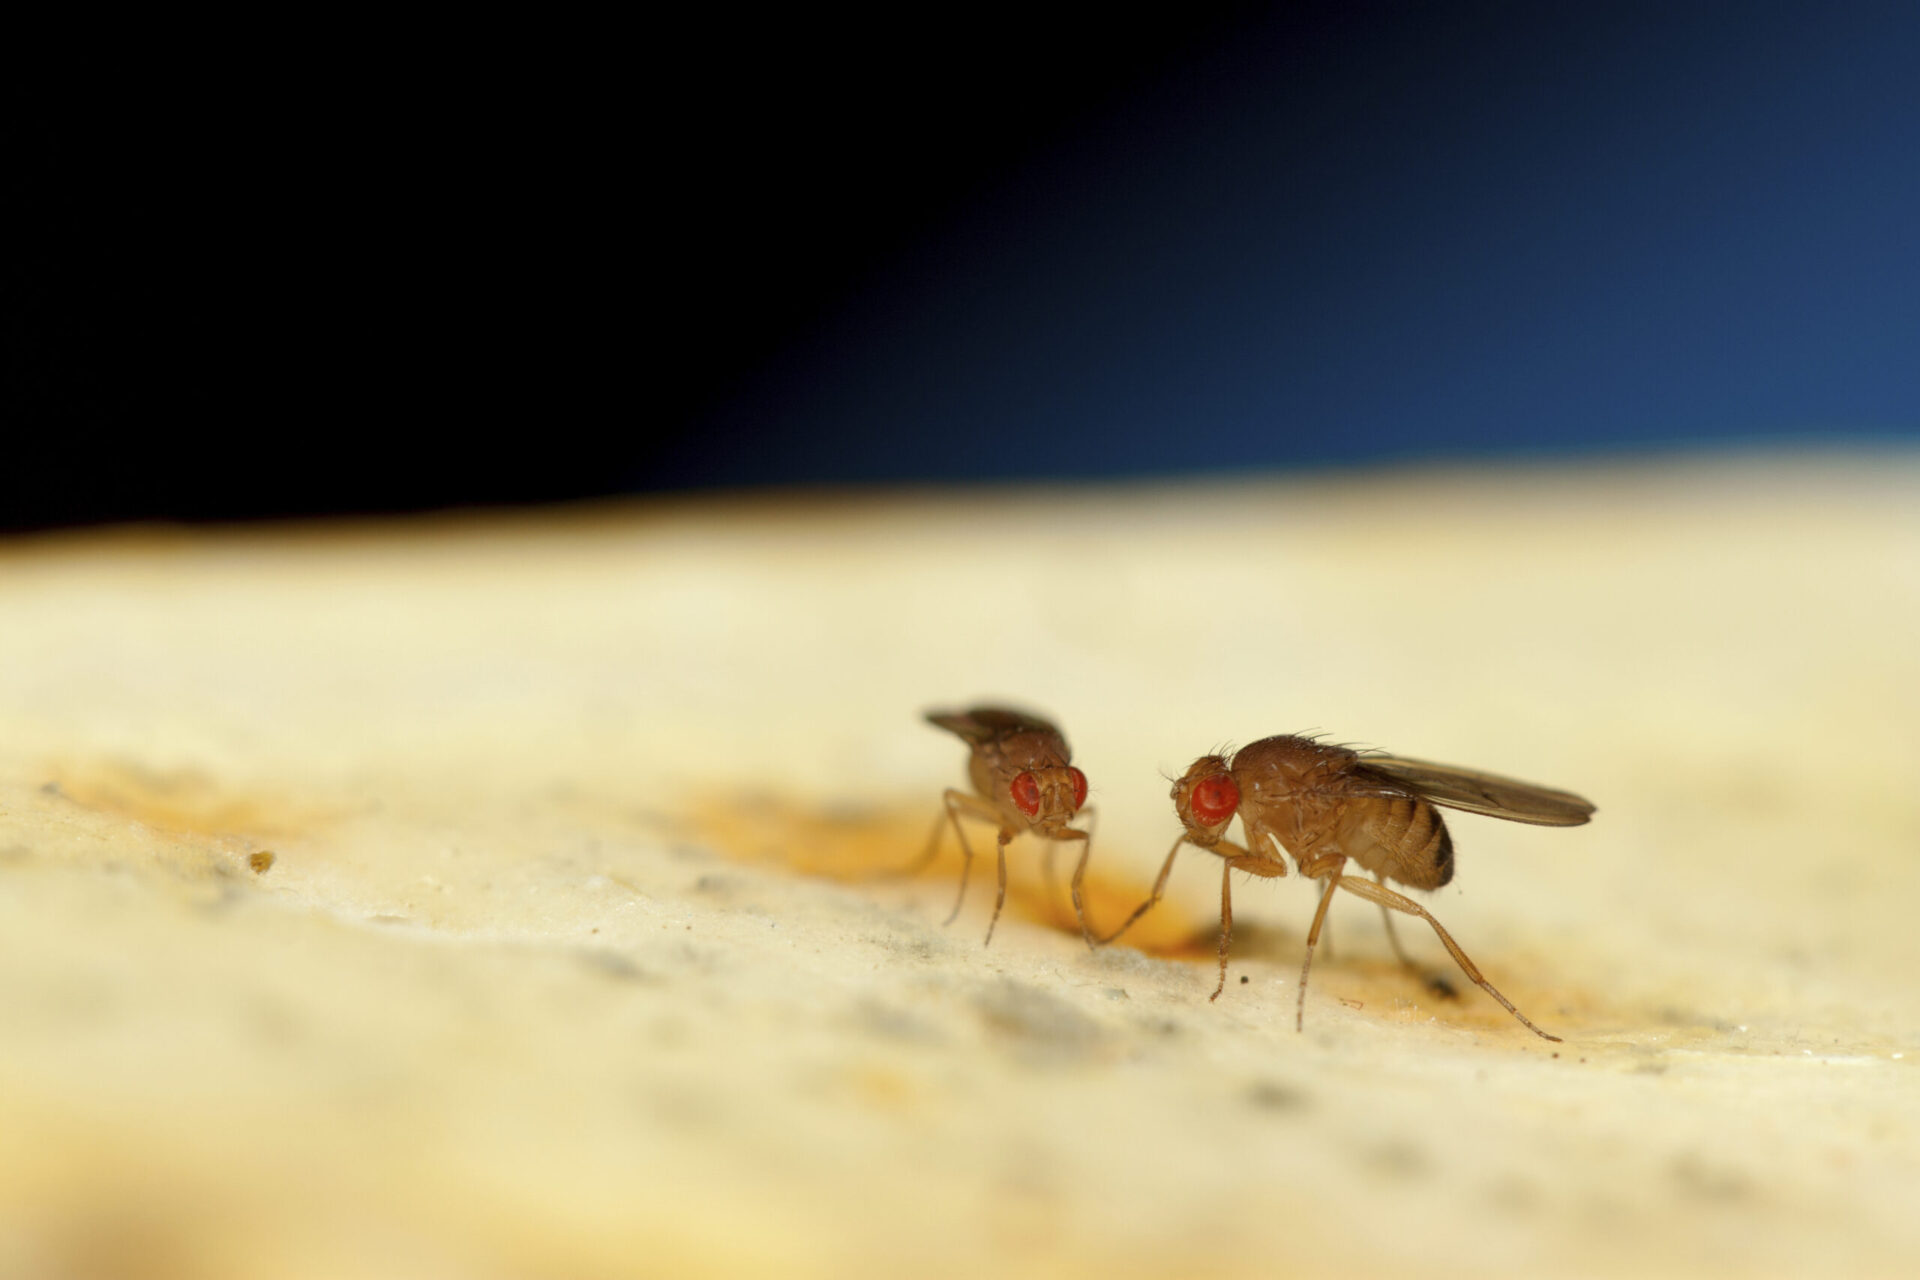 closeup of two, red-eyed fruit flies with brown bodies and black wings